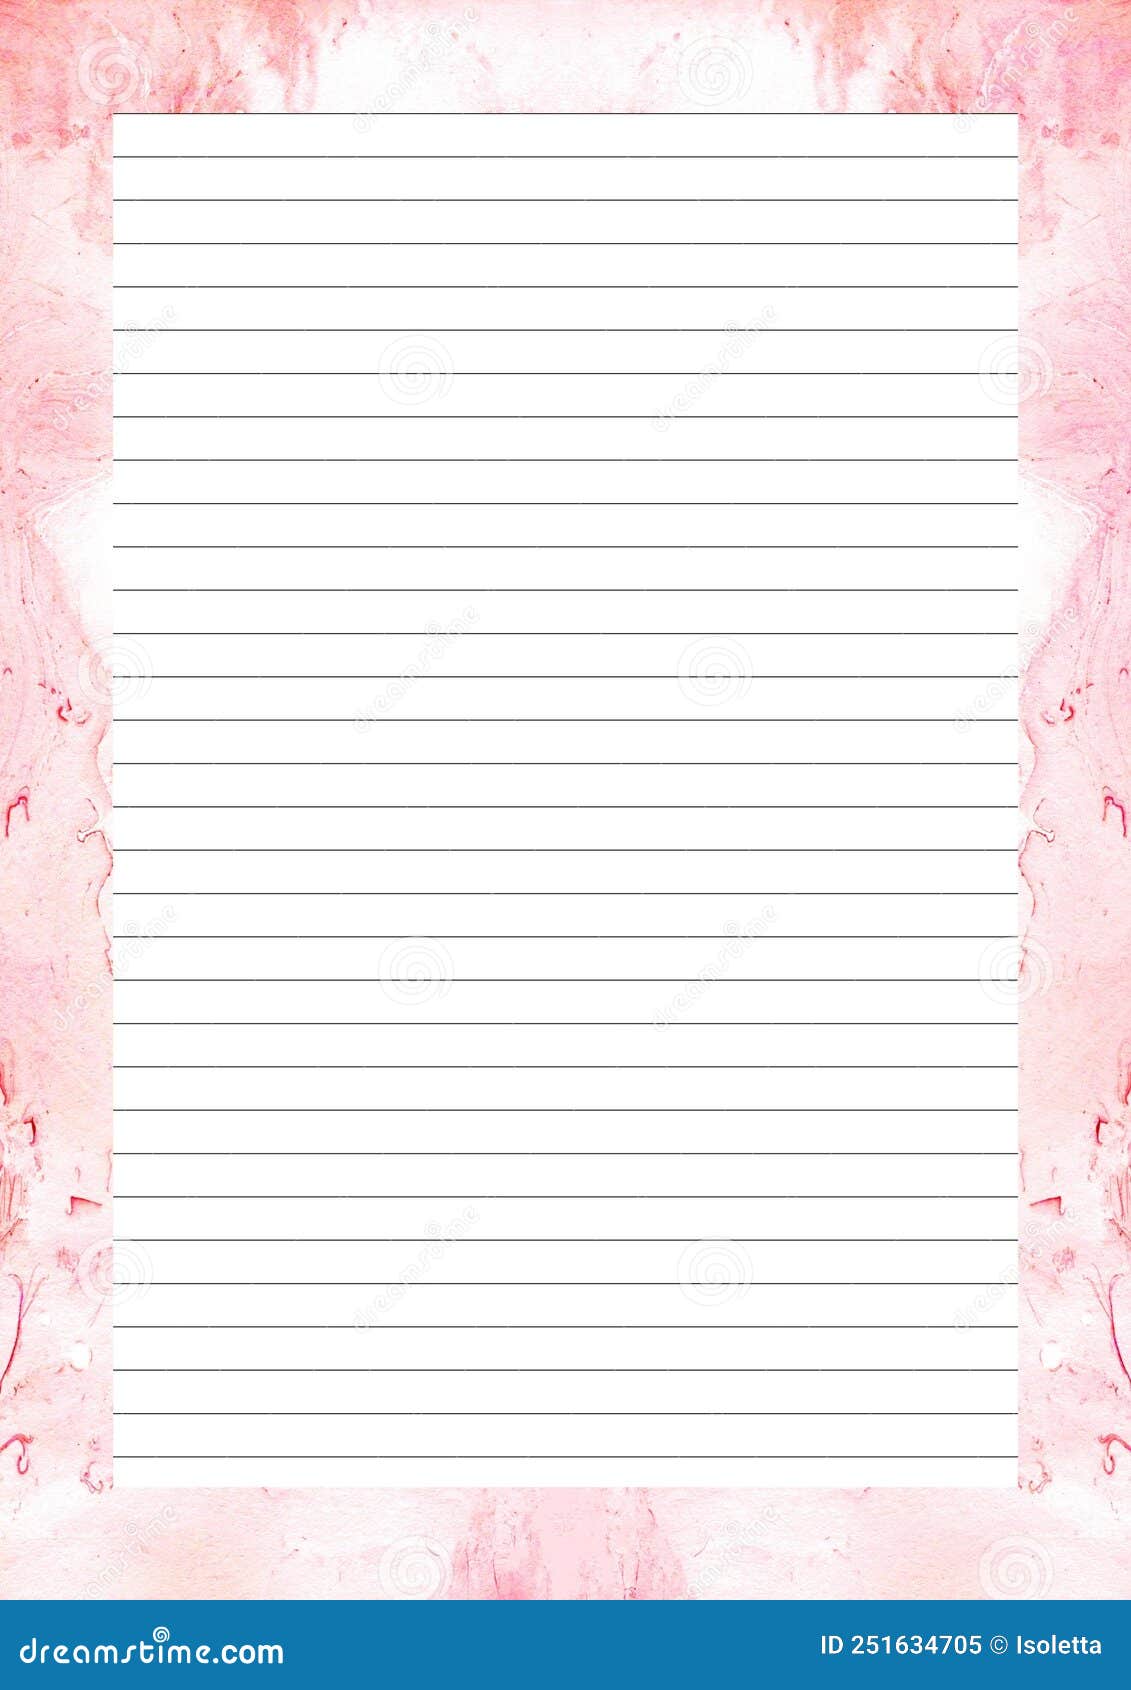 FREE Lined Paper Printable | Many Templates are Available